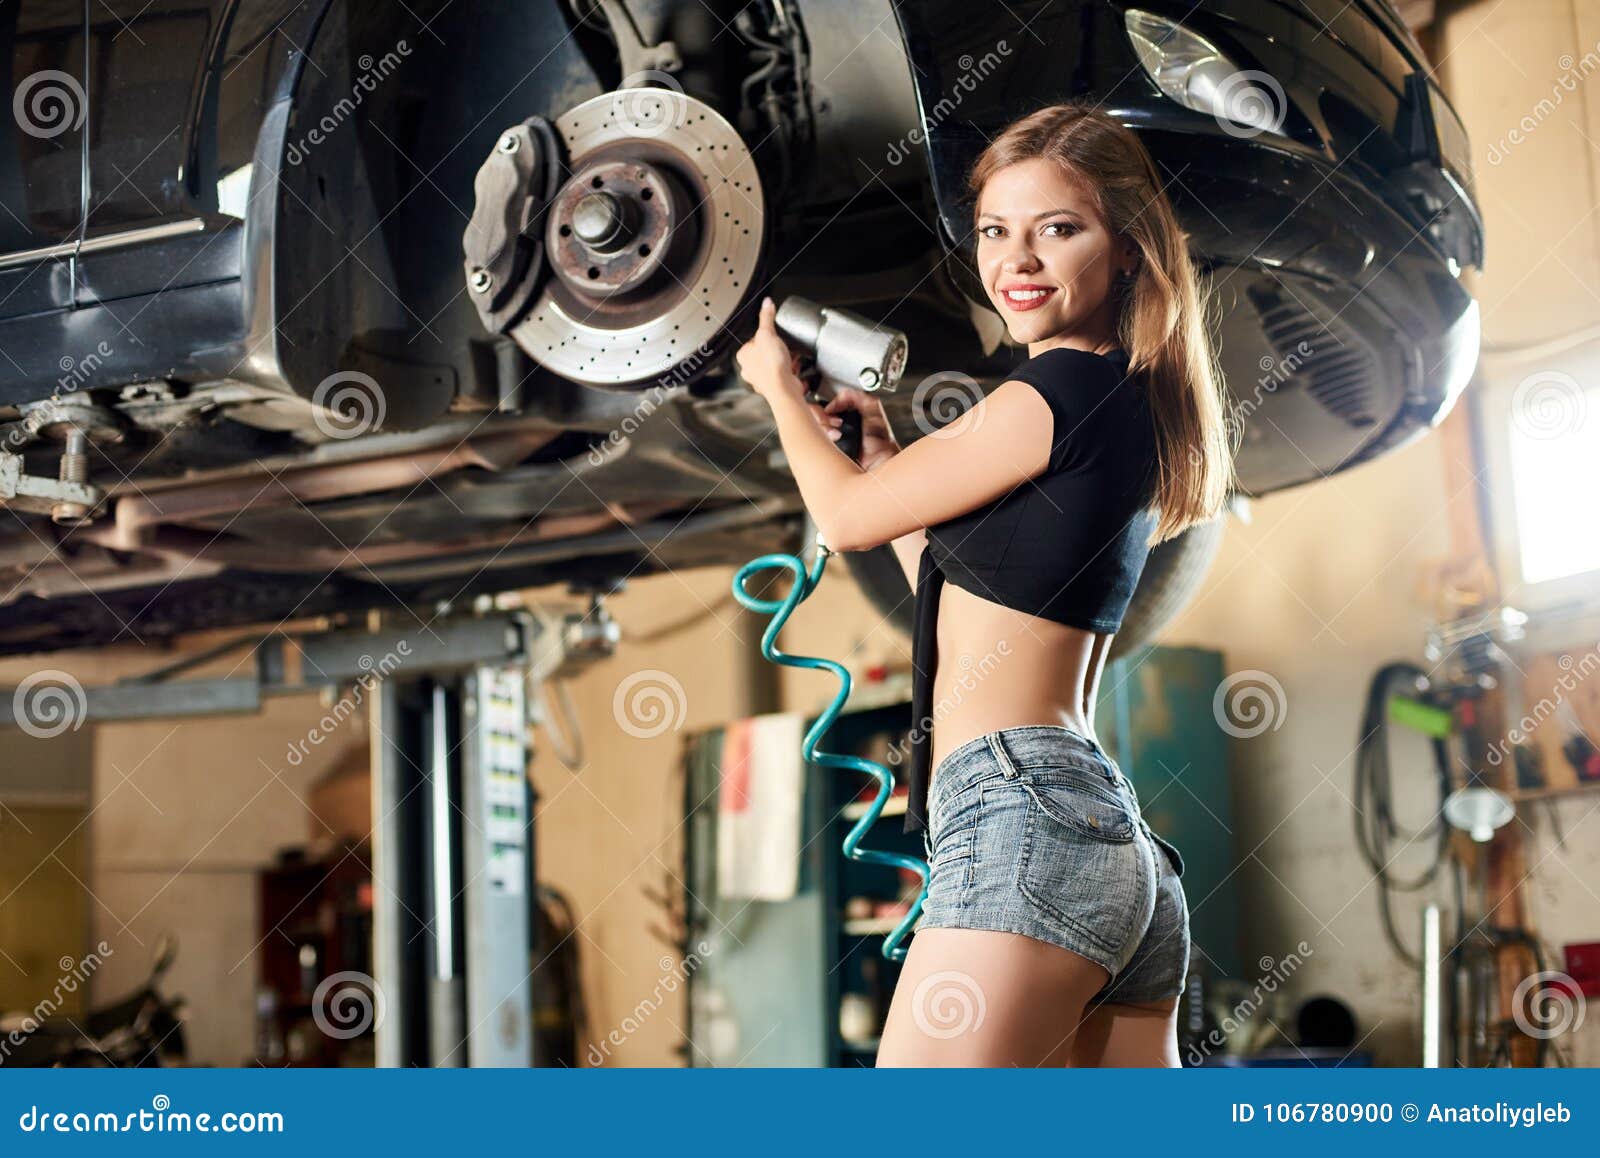 beautiful girl fixing the bottom of the car.